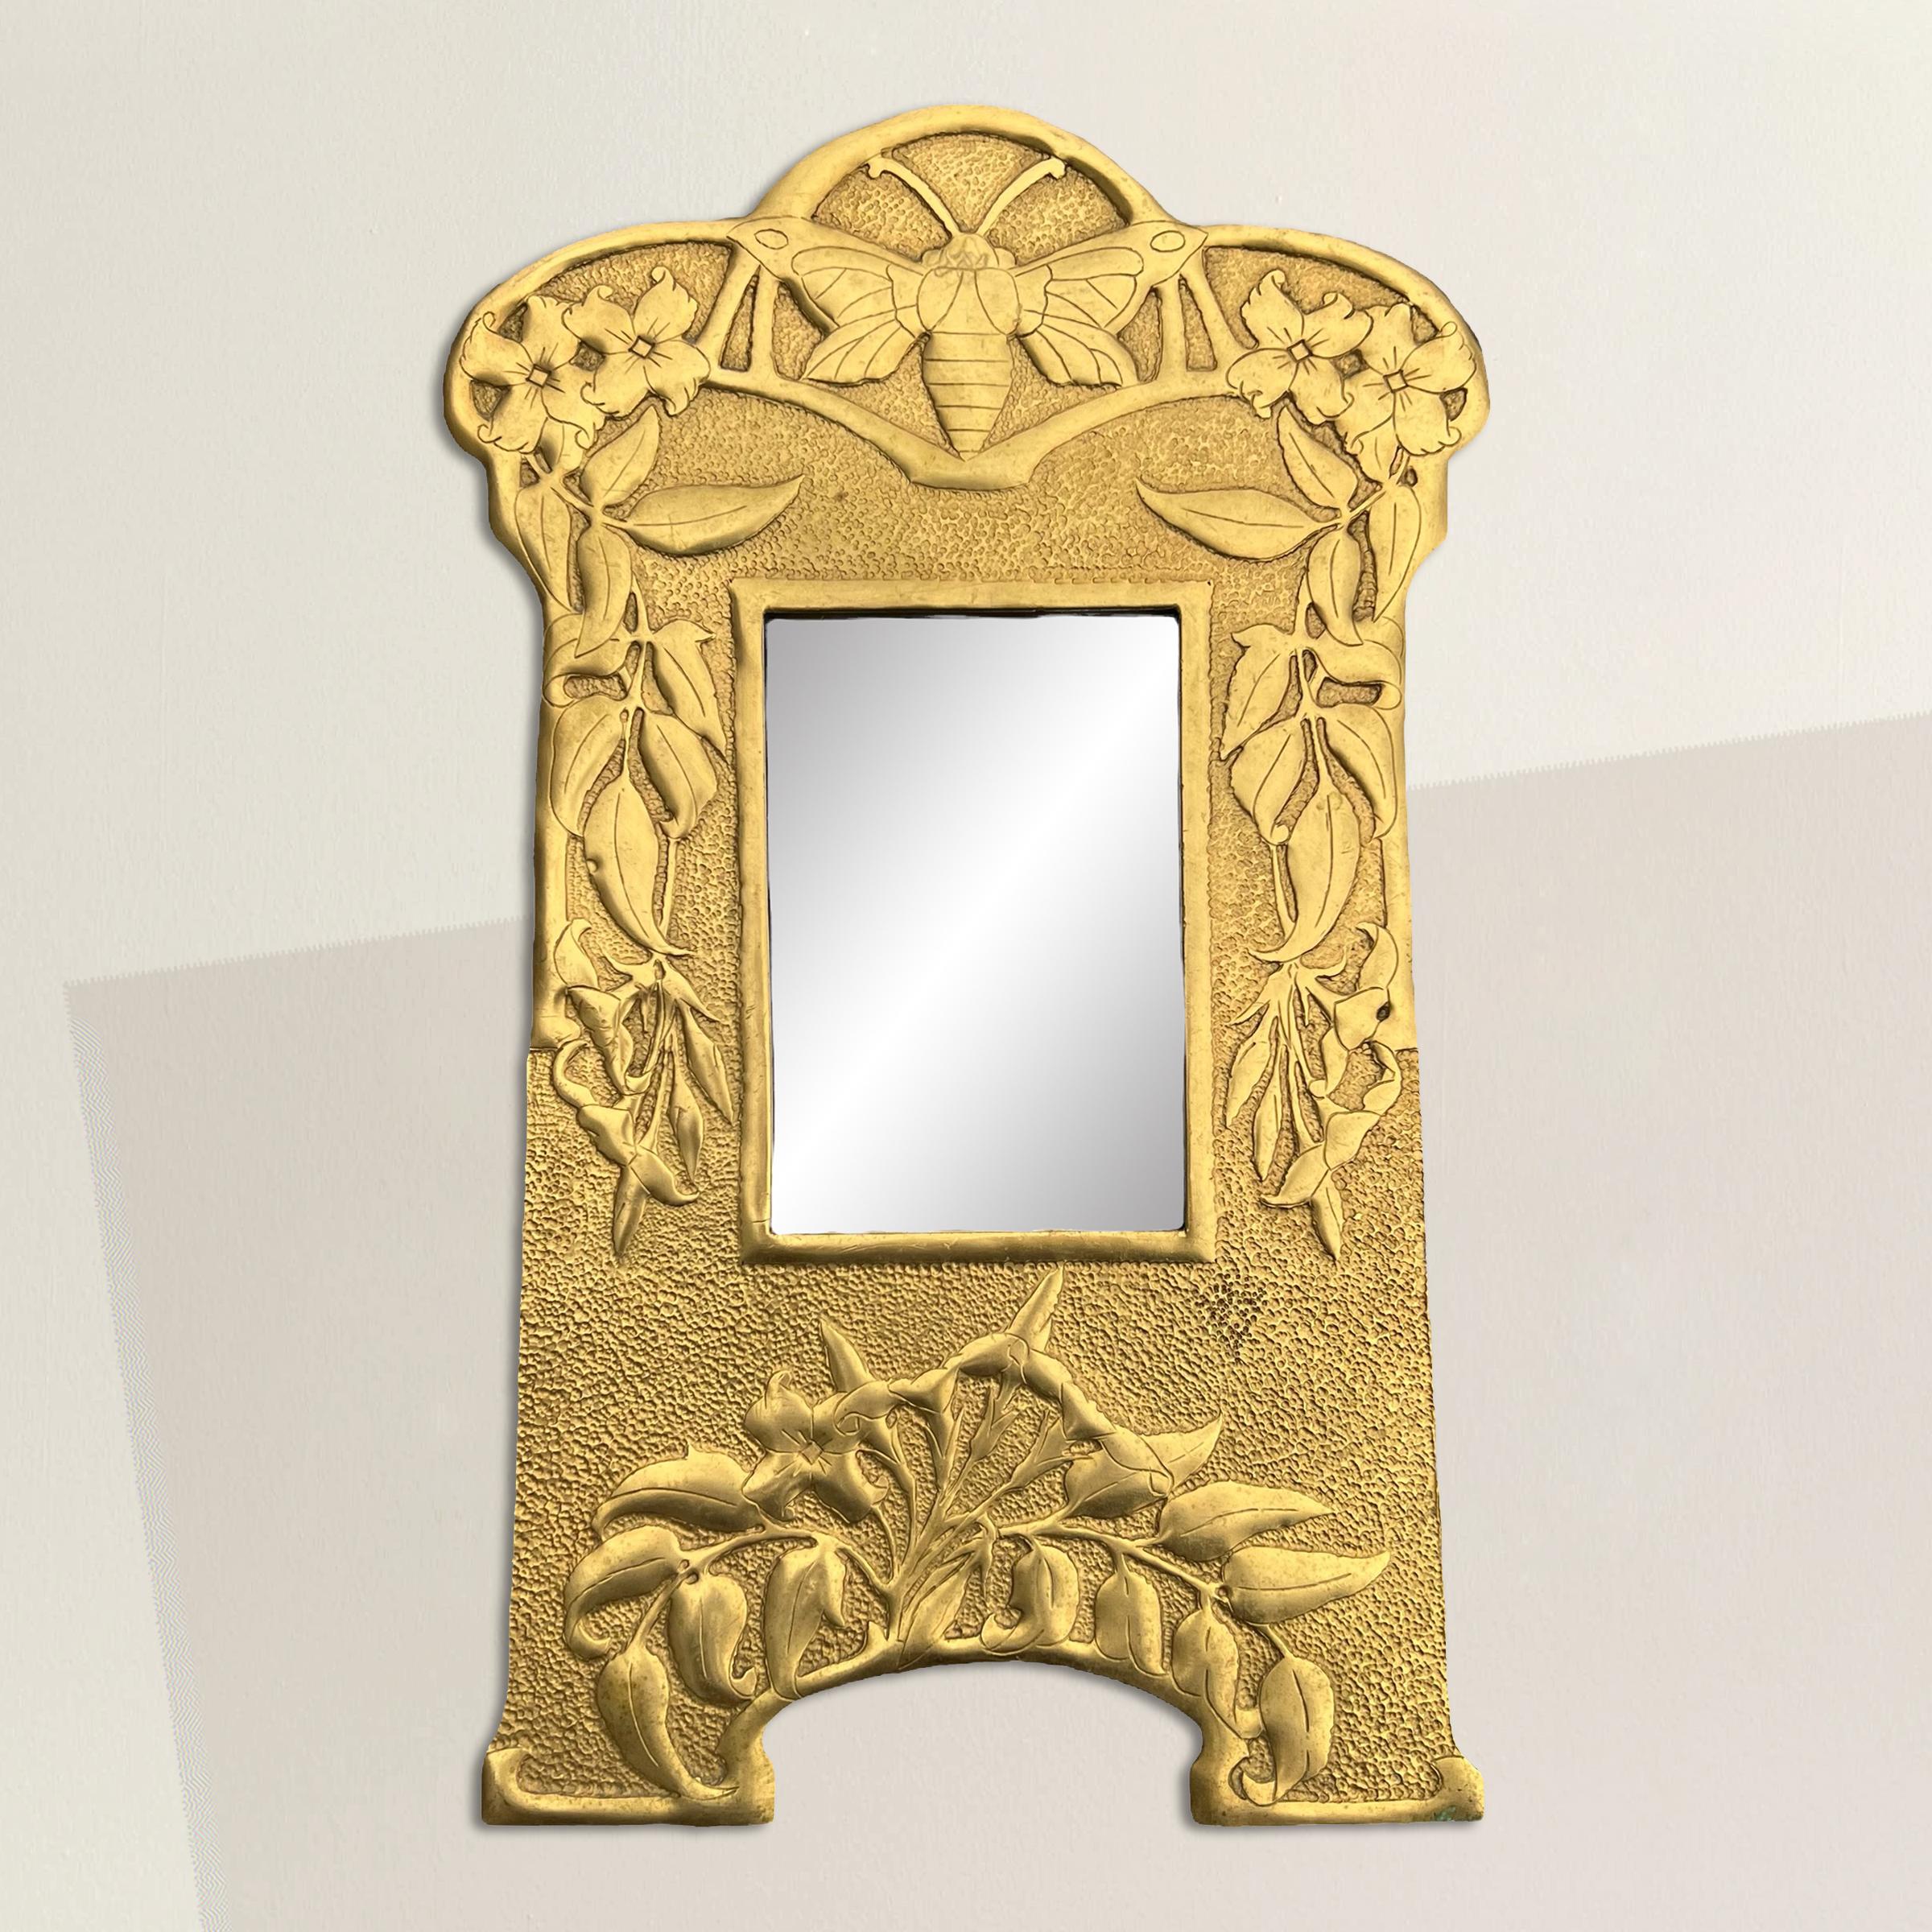 This early 20th-century English Art Nouveau brass mirror is a visual delight, boasting intricate repoussé decoration. At its pinnacle sits a majestic bee, symbolizing industry, diligence, and community, characteristic themes of the Art Nouveau